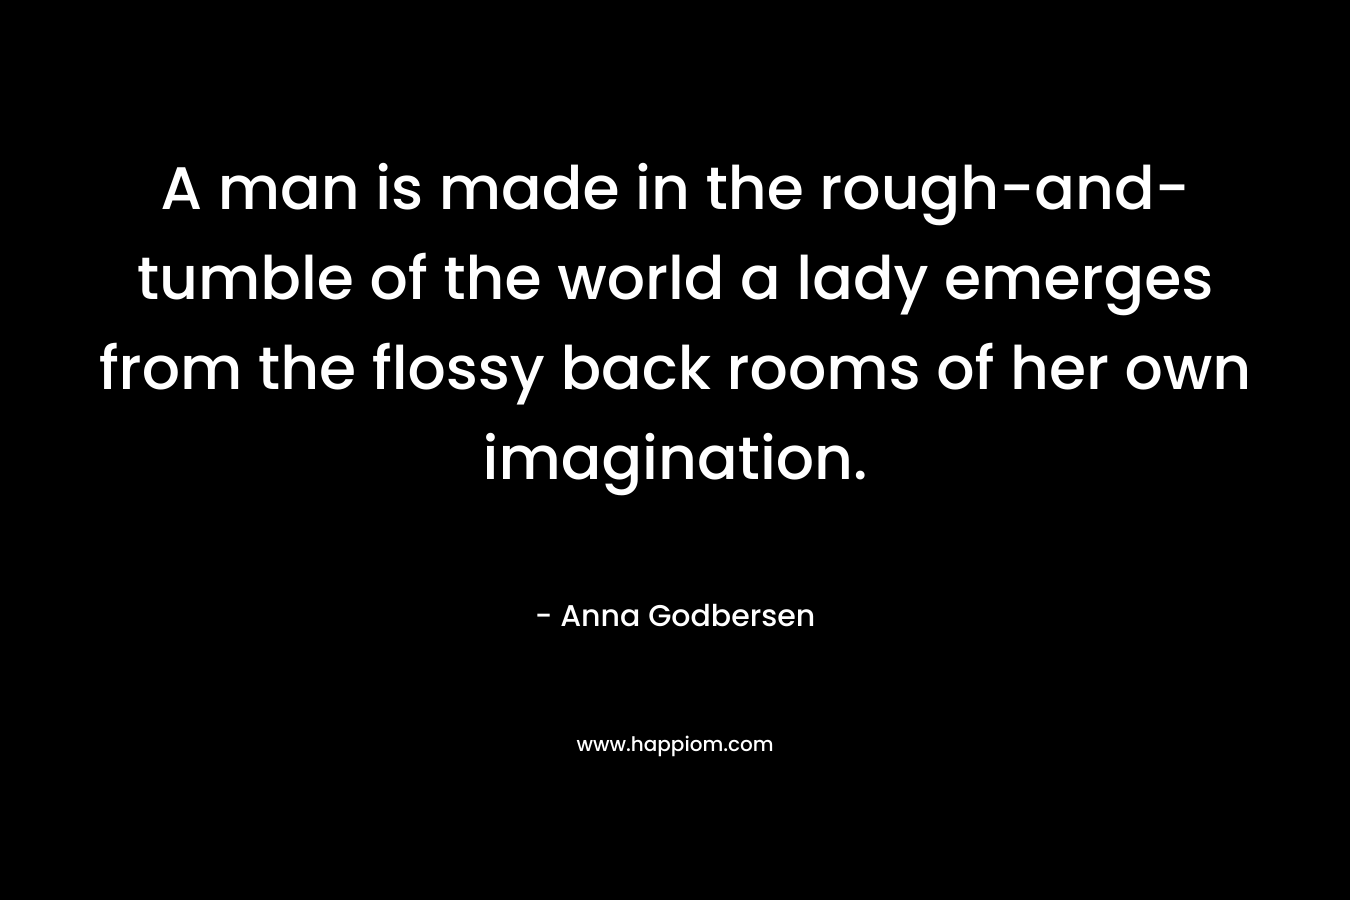 A man is made in the rough-and-tumble of the world a lady emerges from the flossy back rooms of her own imagination. – Anna Godbersen